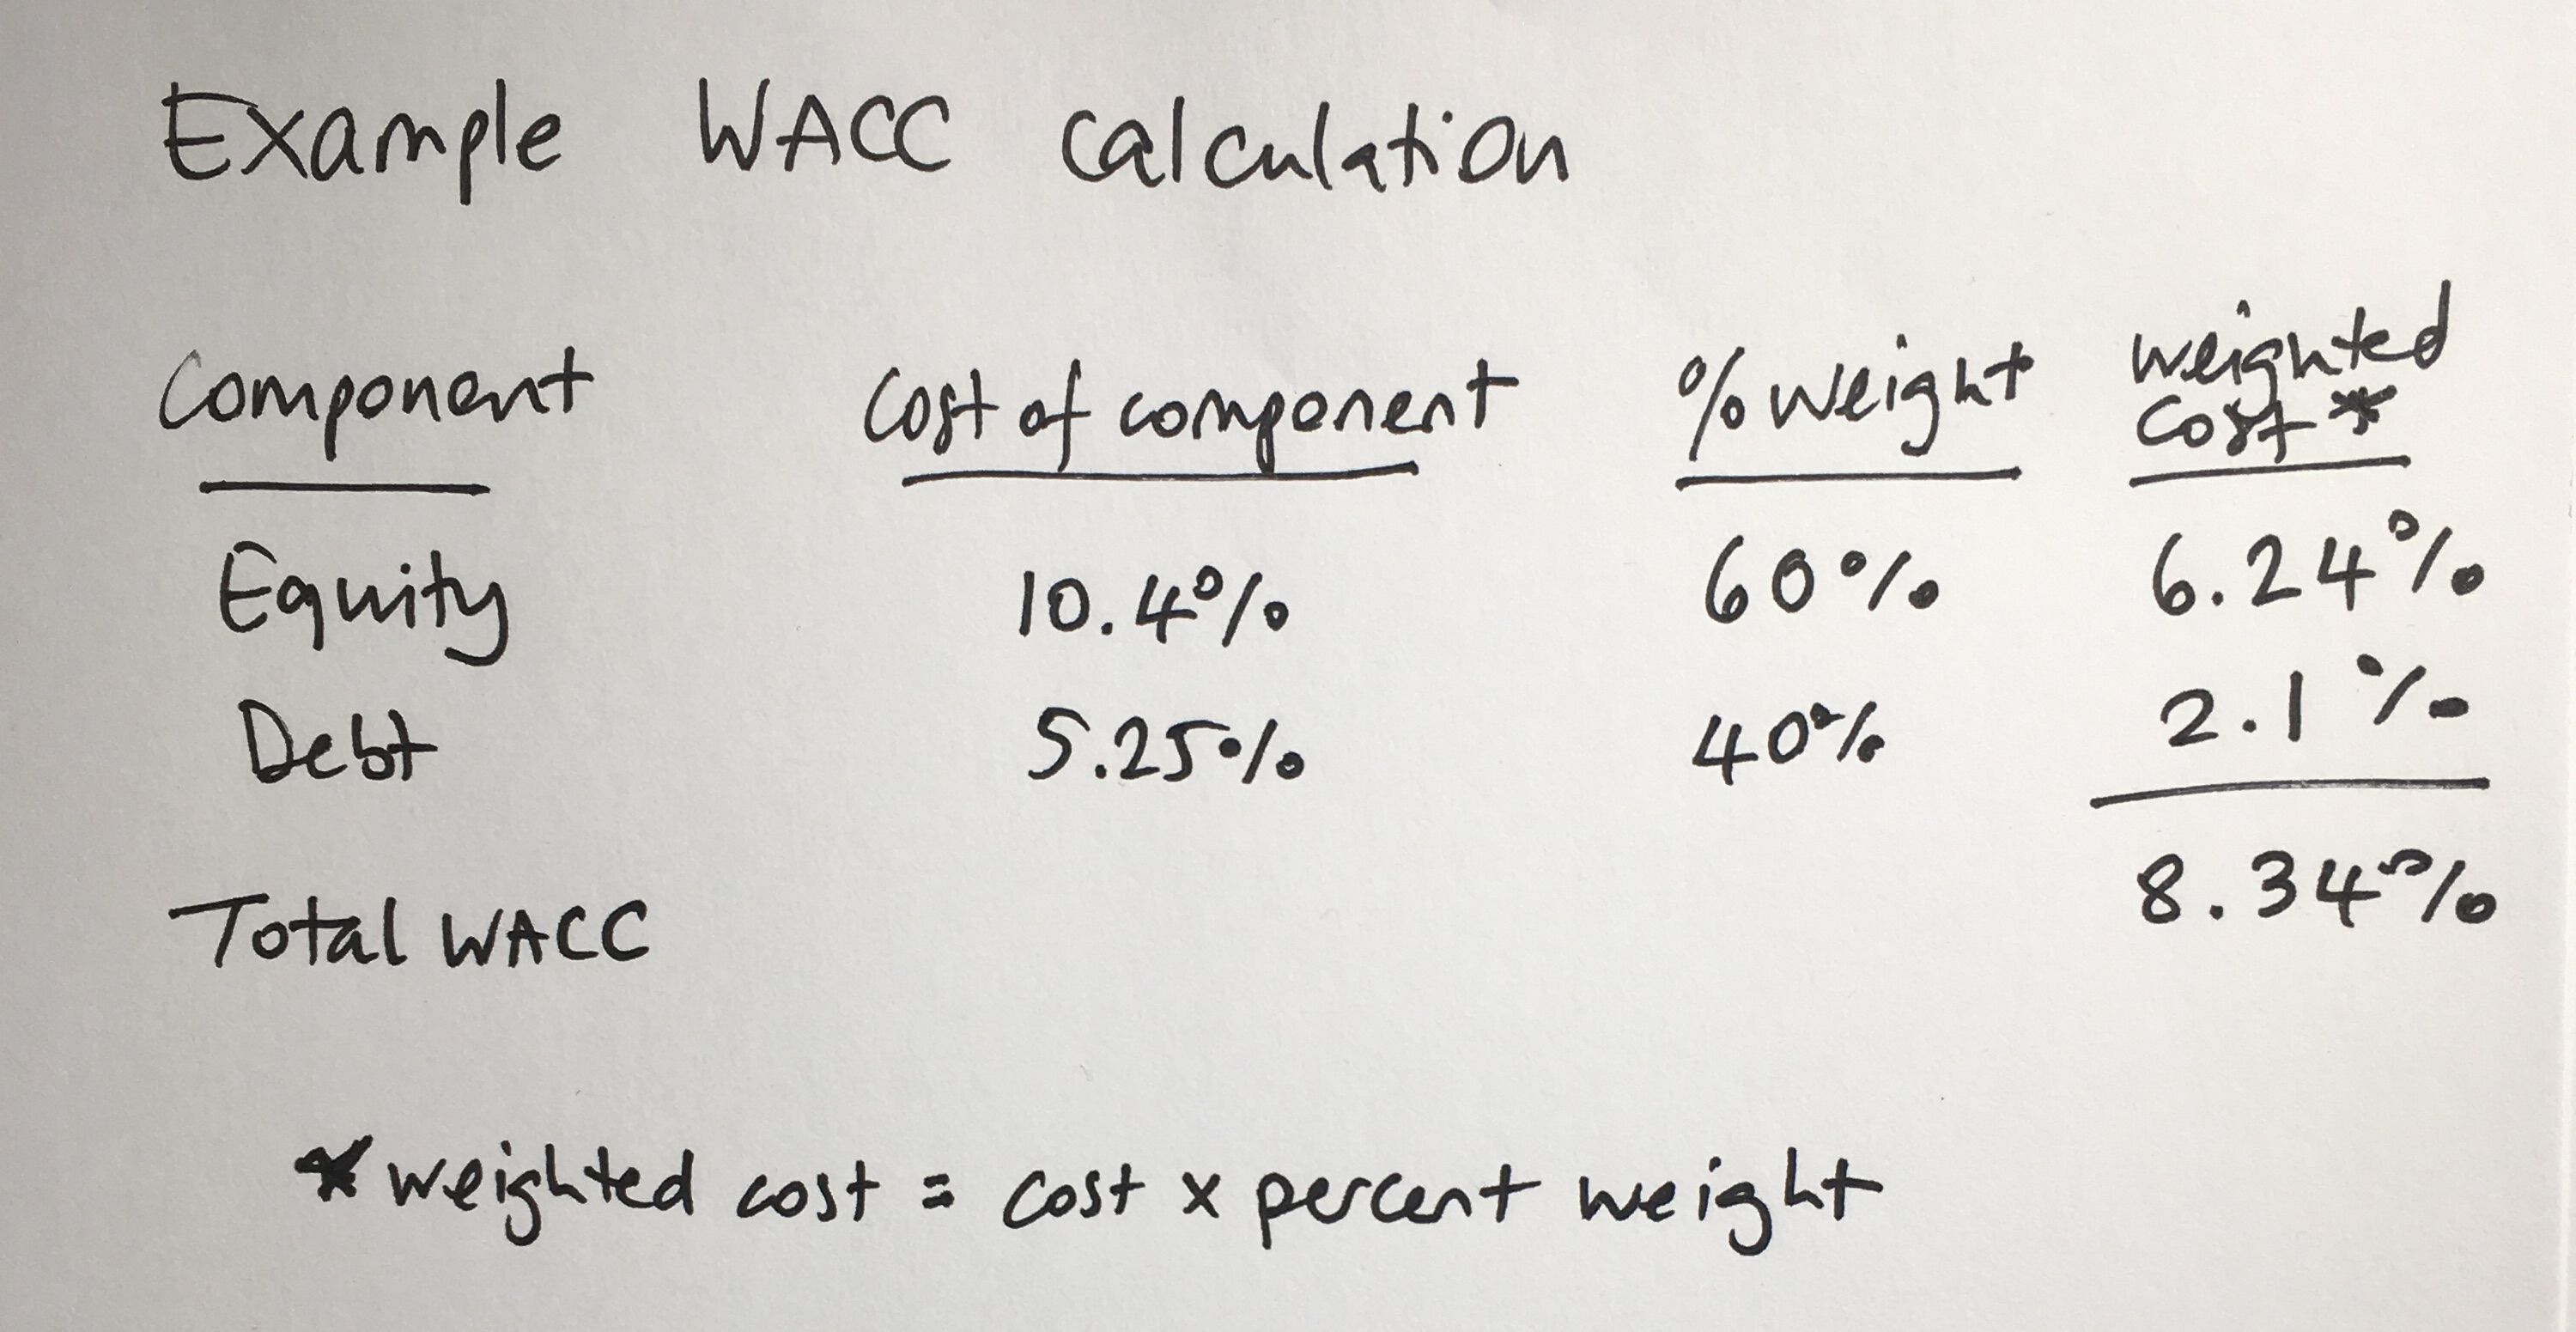 WACC calculation example